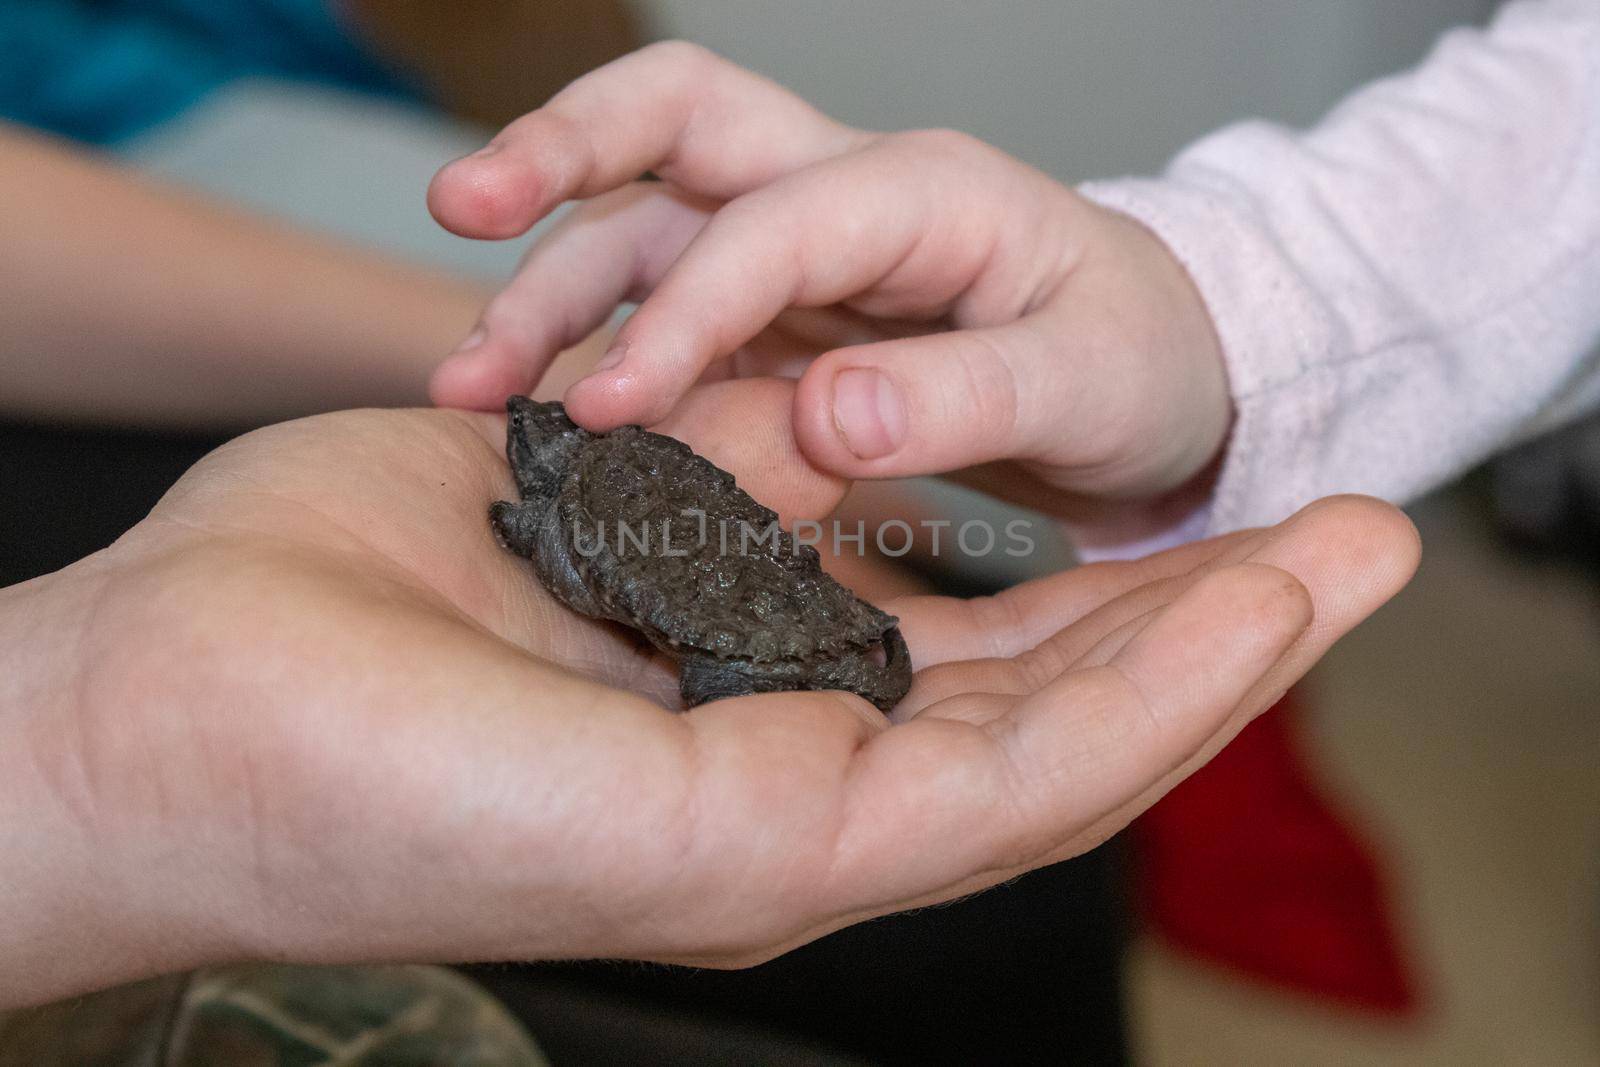 Kids holding a Baby snapping turtle close up  by gena_wells